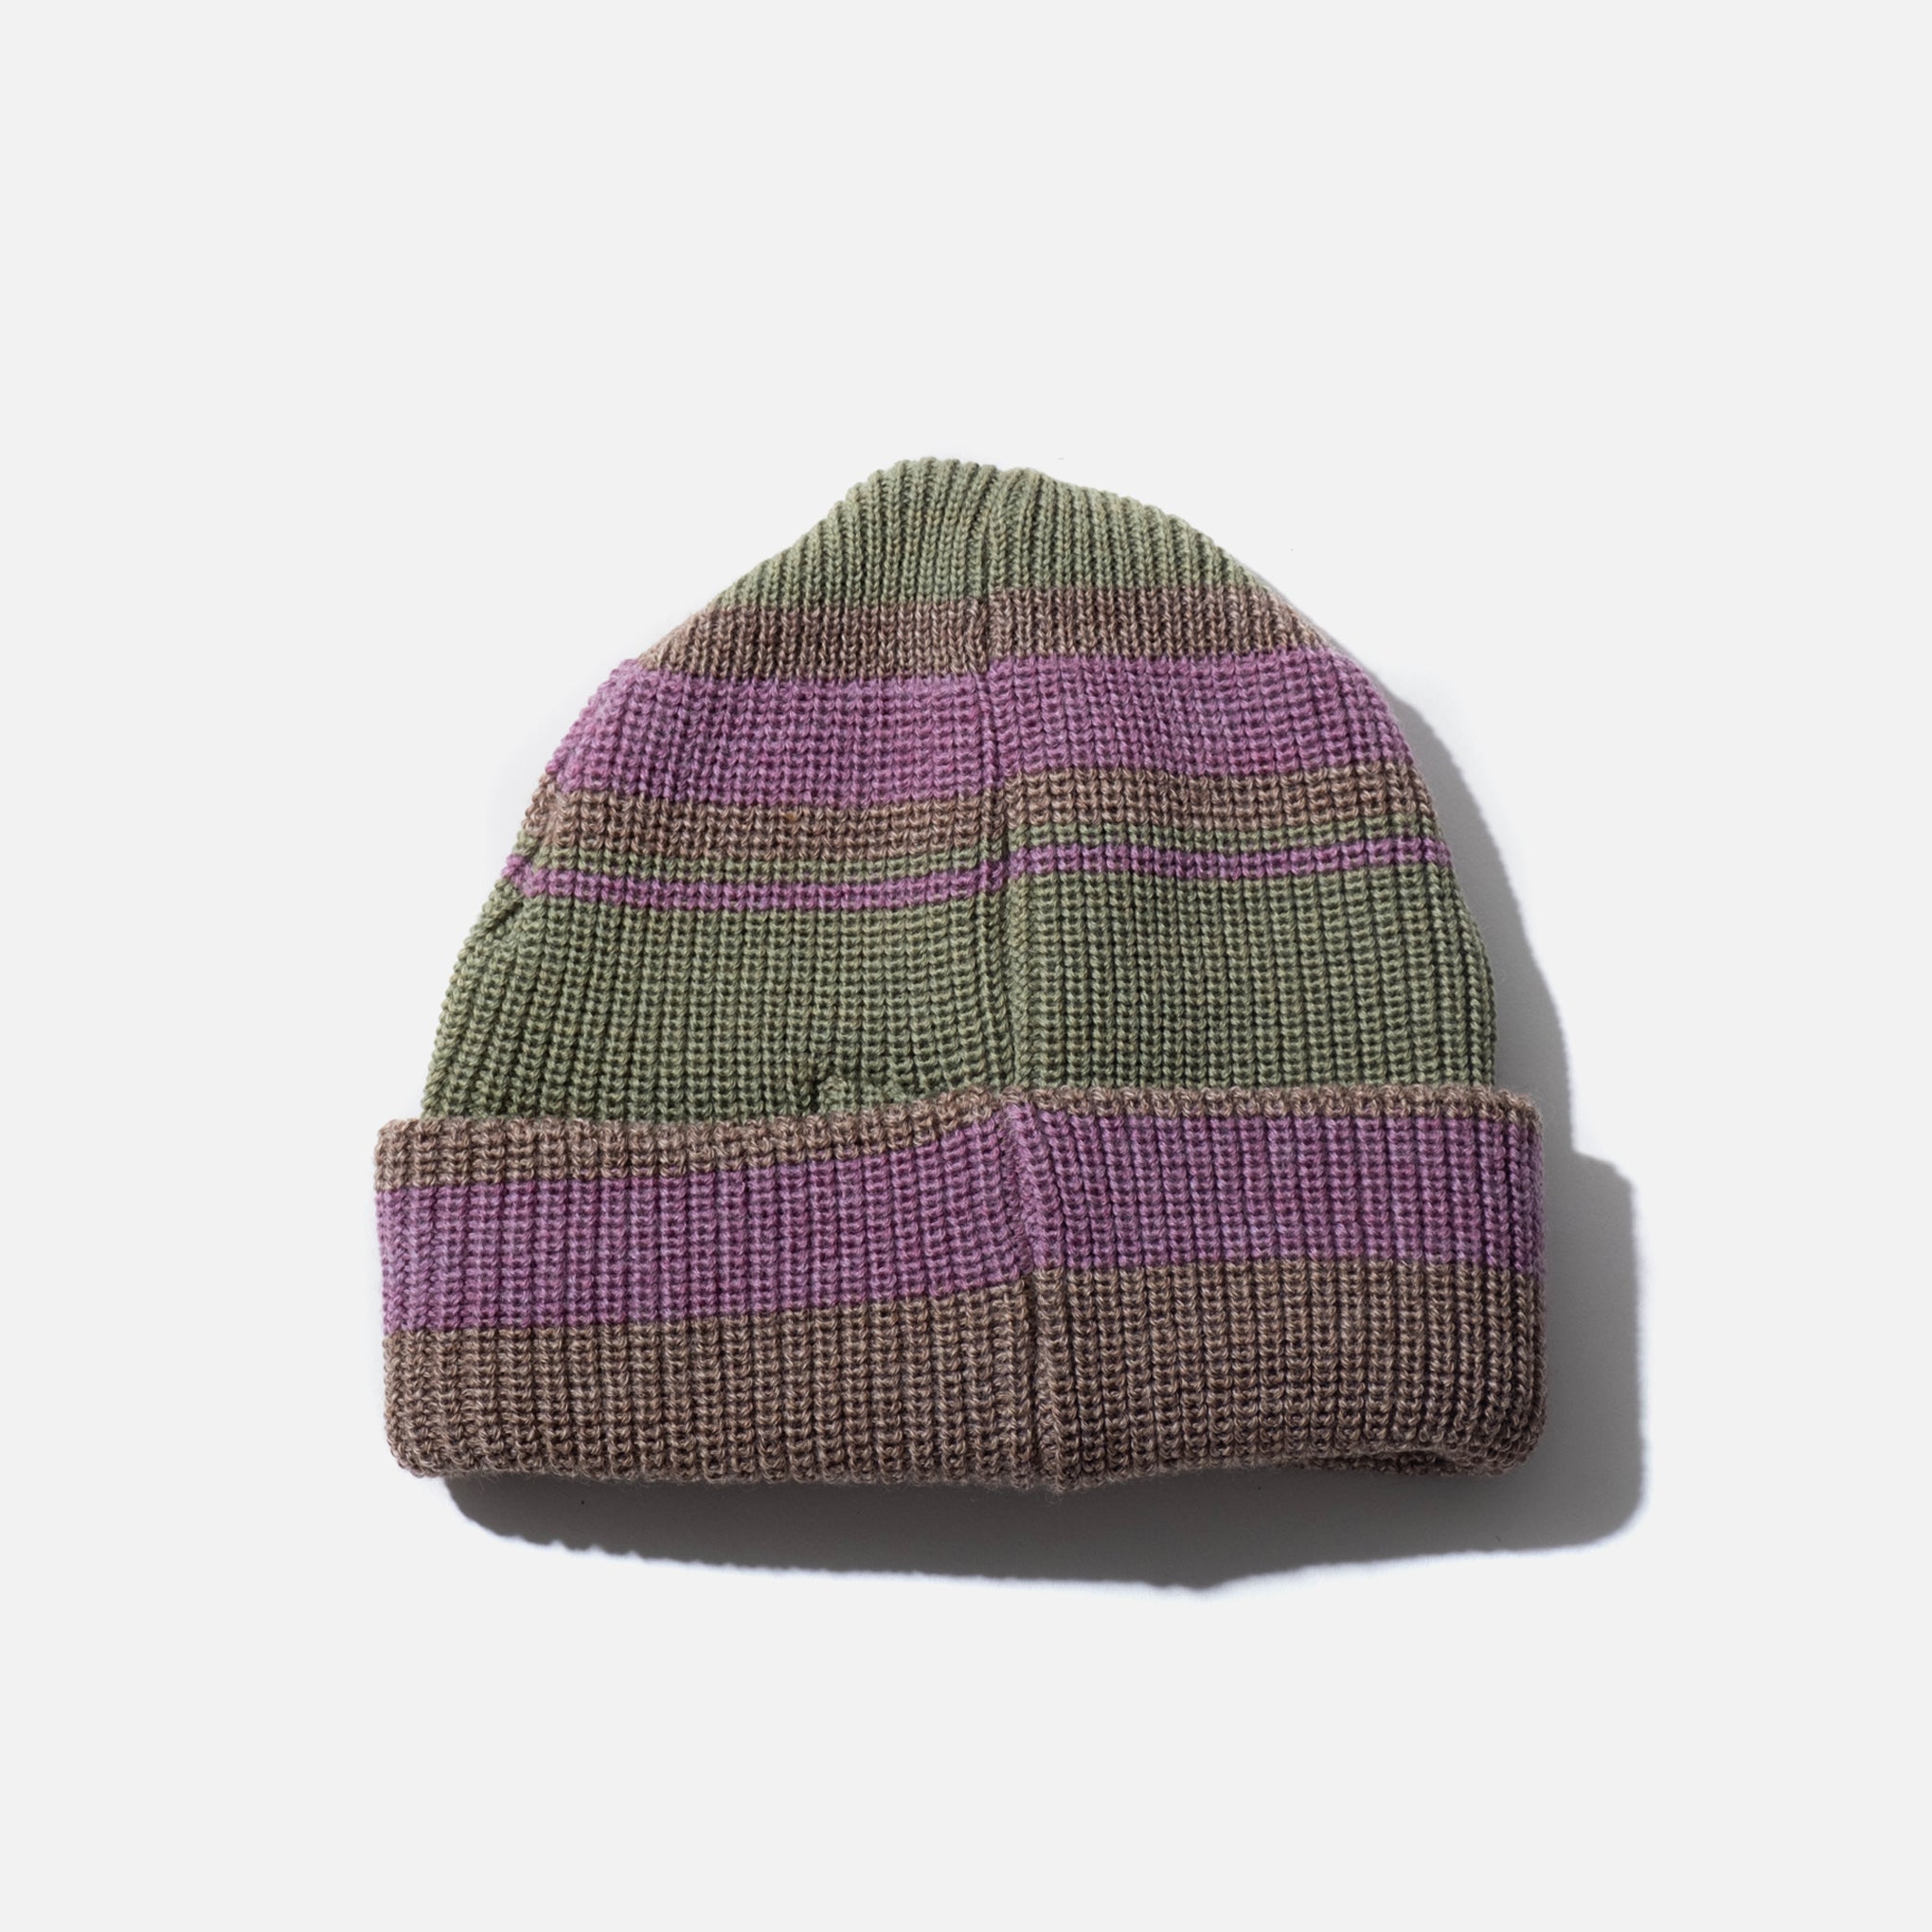 NOROLL CONFECTION BEANIE REDノーロール ビーニー